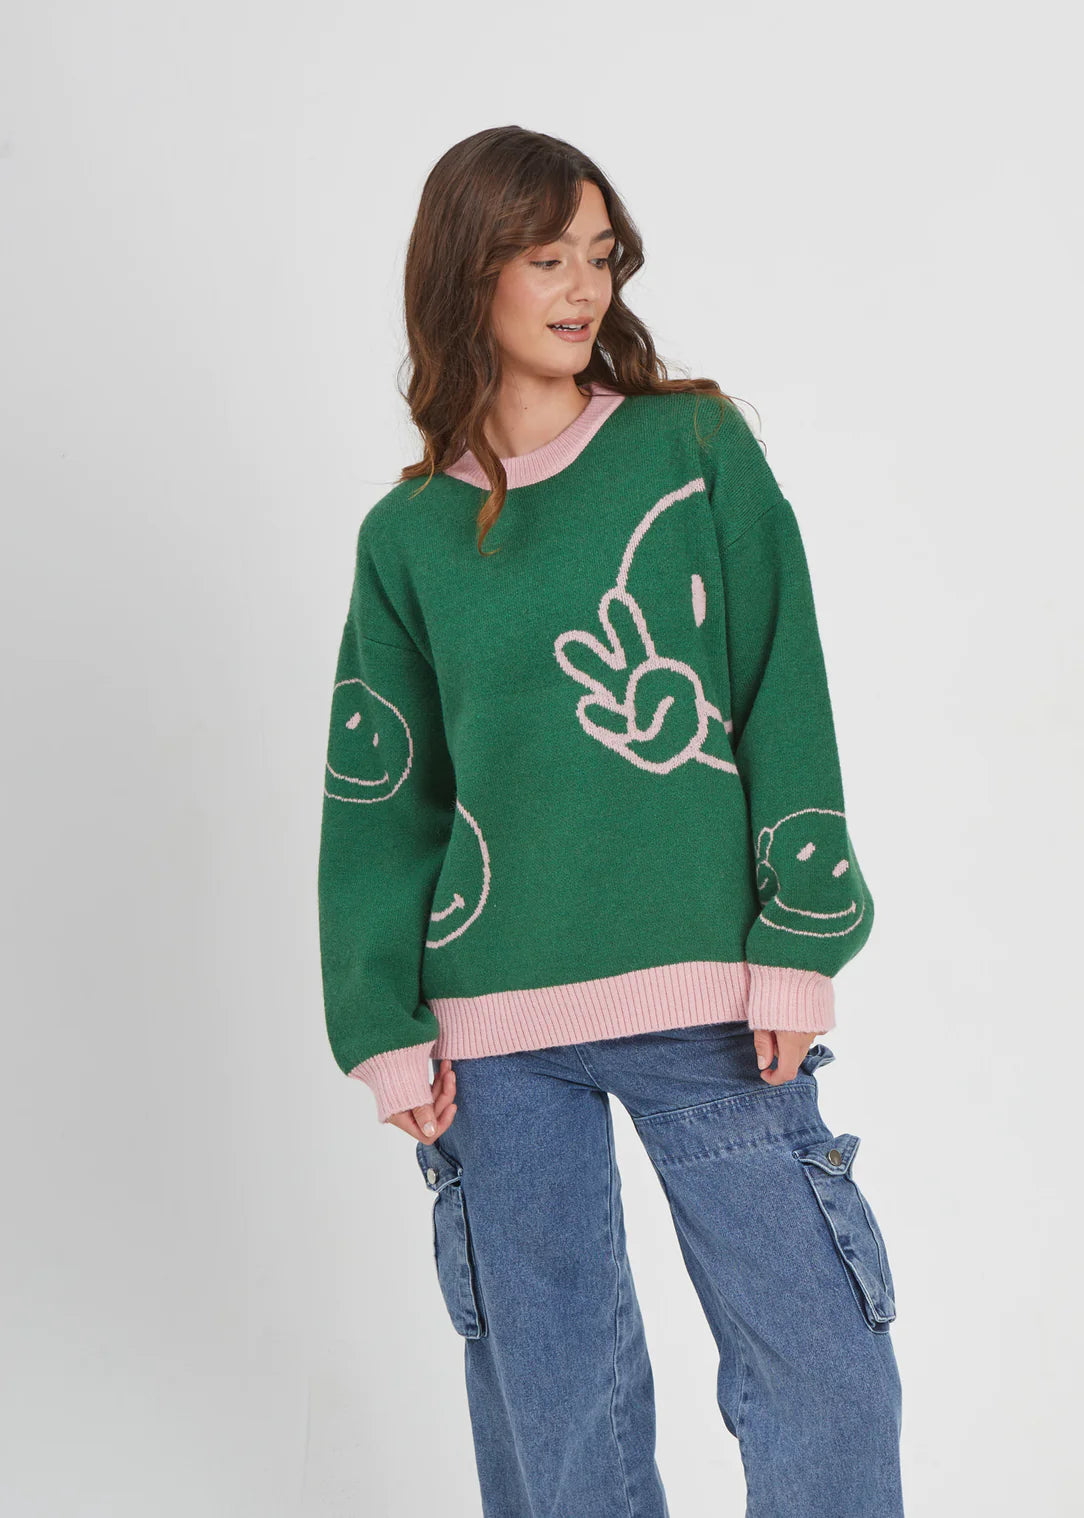 OVERSIZED SWEATER- GREEN SMILEY FACE